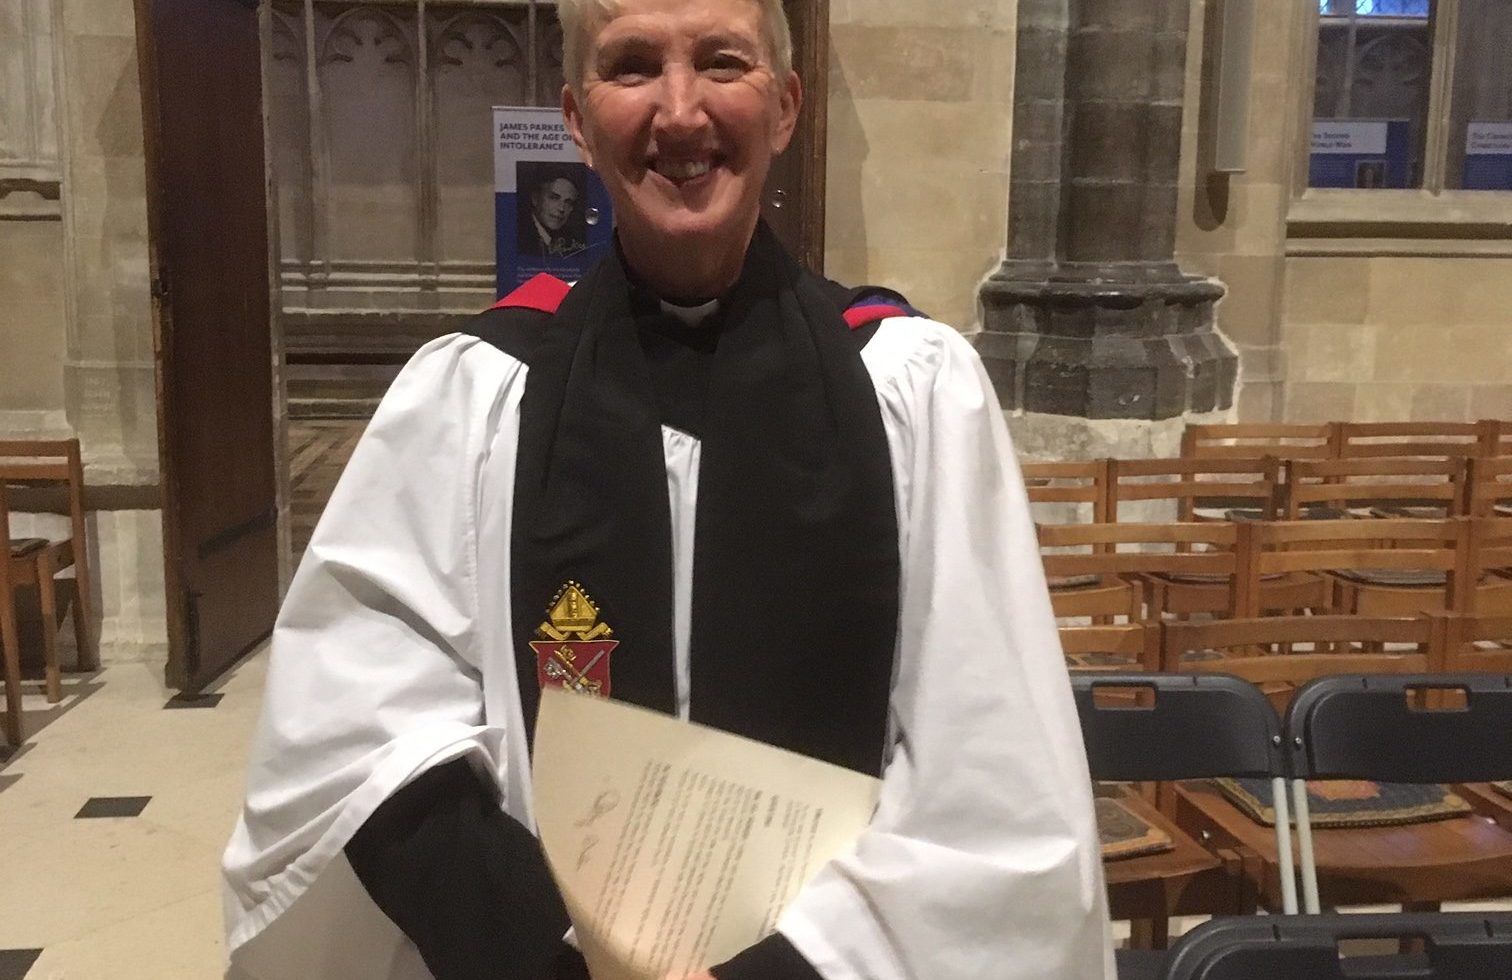 Revd. Dr. Canon Erica Roberts! Installed and ready to go!